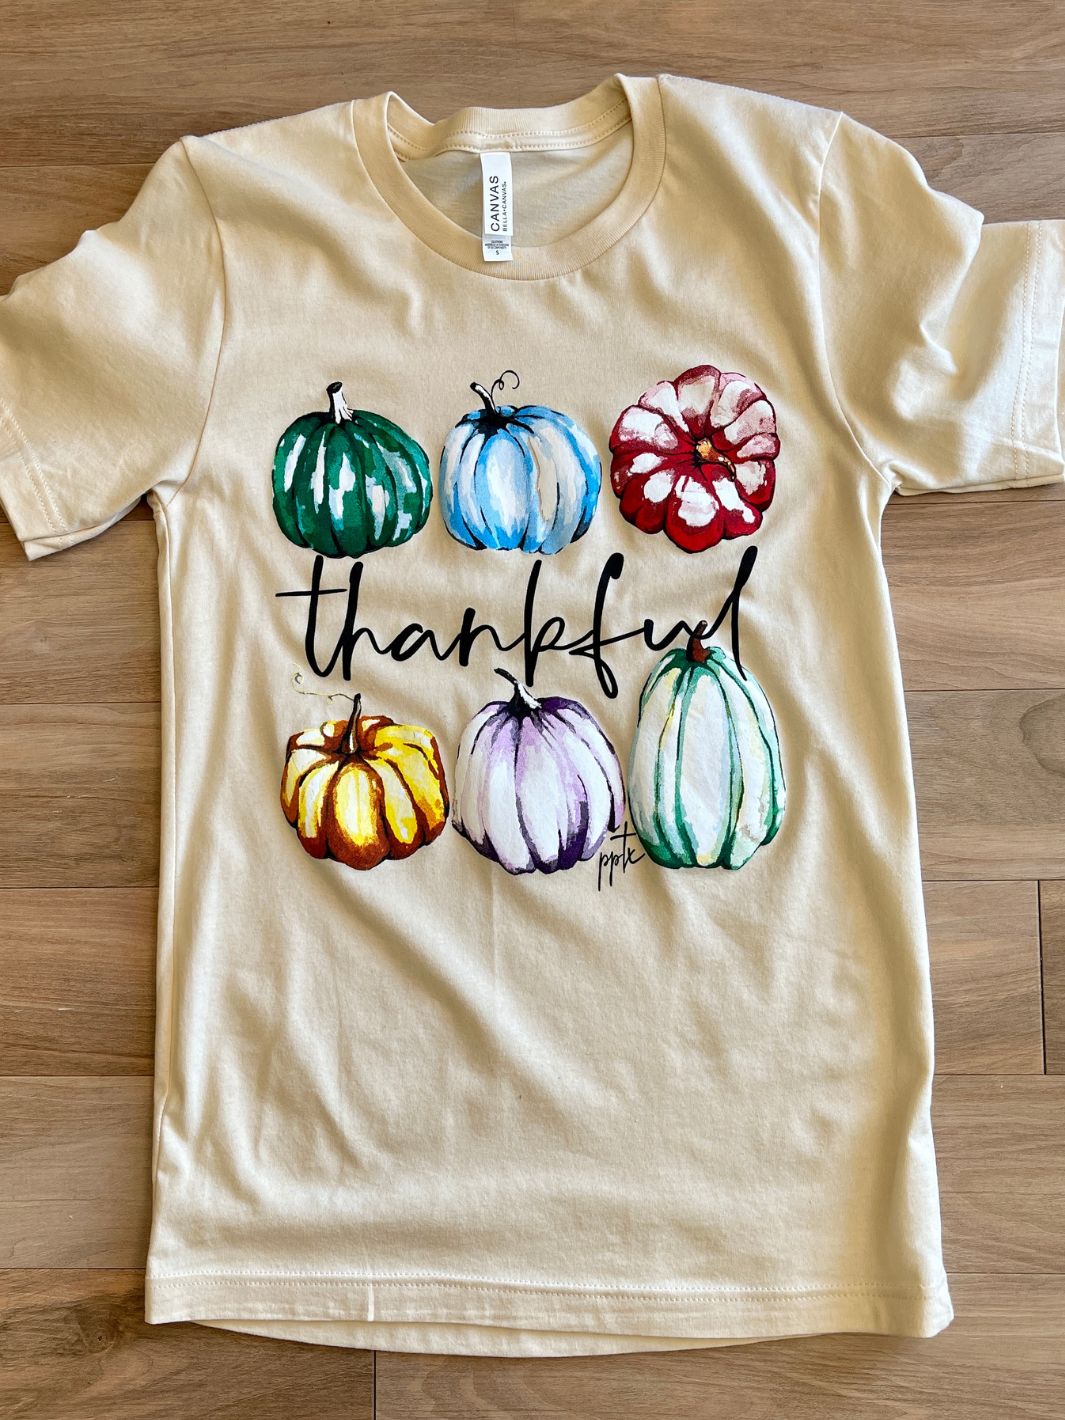 thankful text on cream colored tee with 6 different pumpkins and gourds